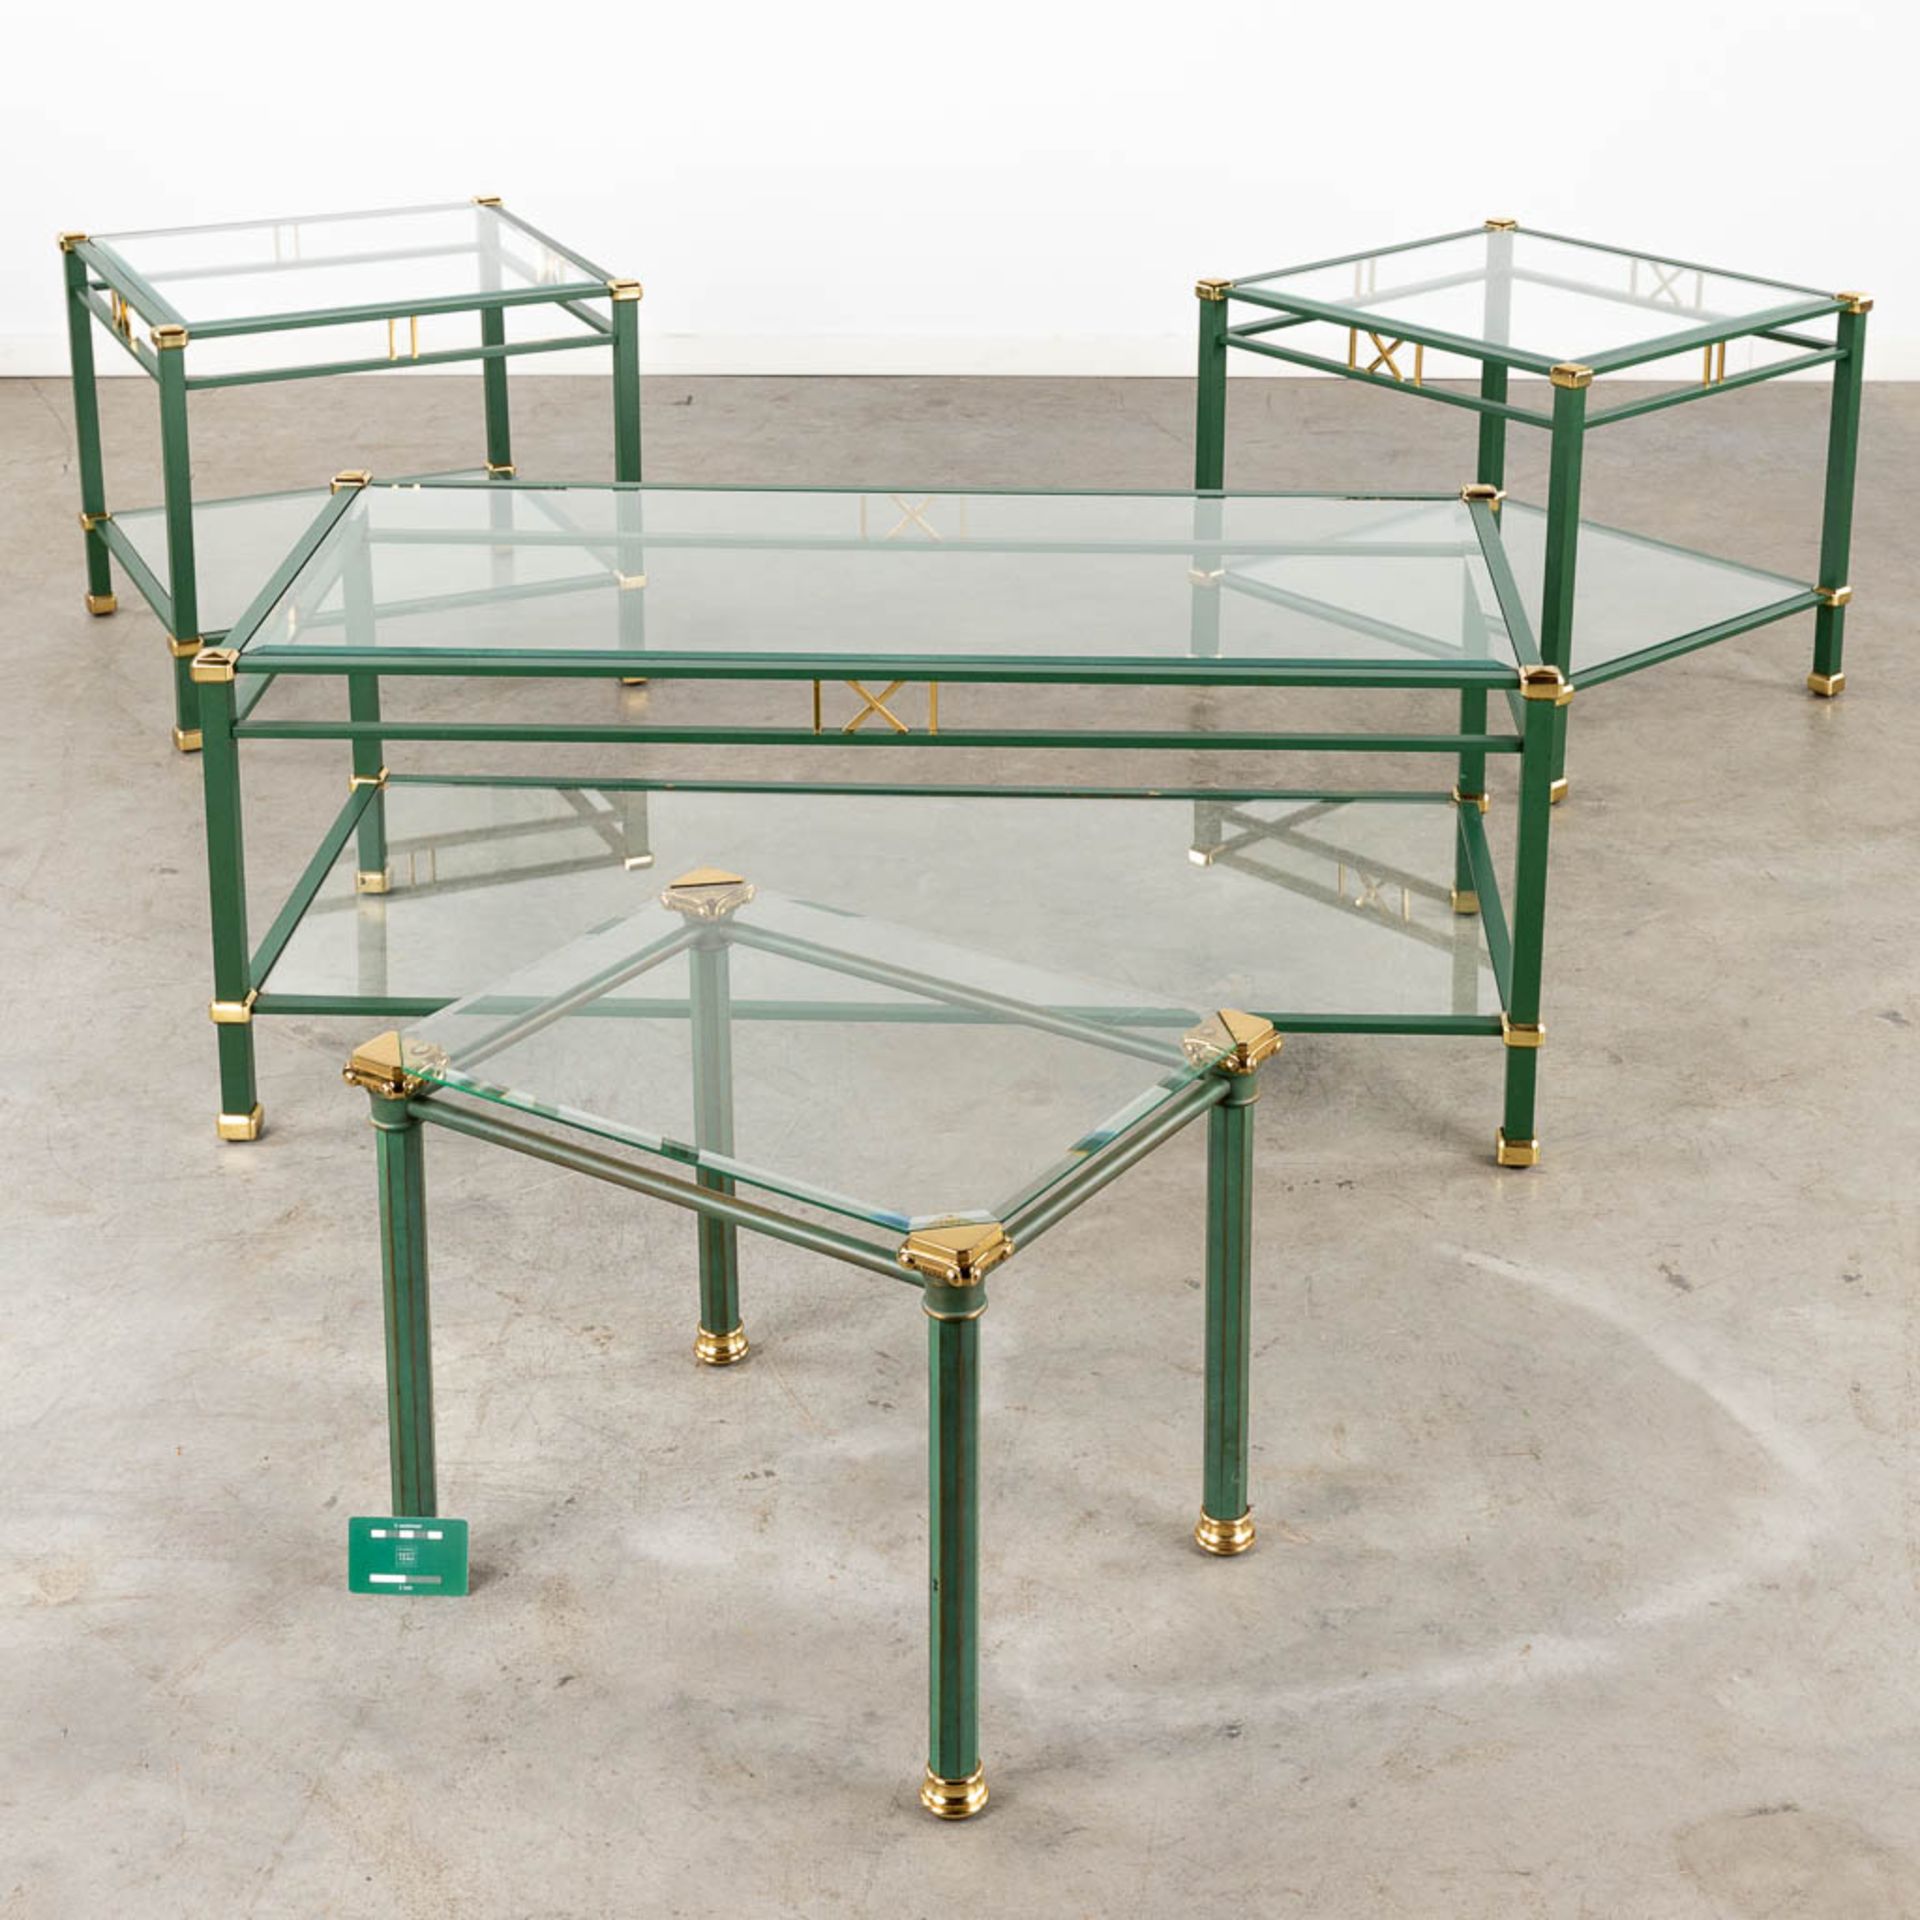 4 matching coffee and side tables, lacquered metal and glass, circa 1980. (L:58 x W:118 x H:46 cm) - Bild 2 aus 13